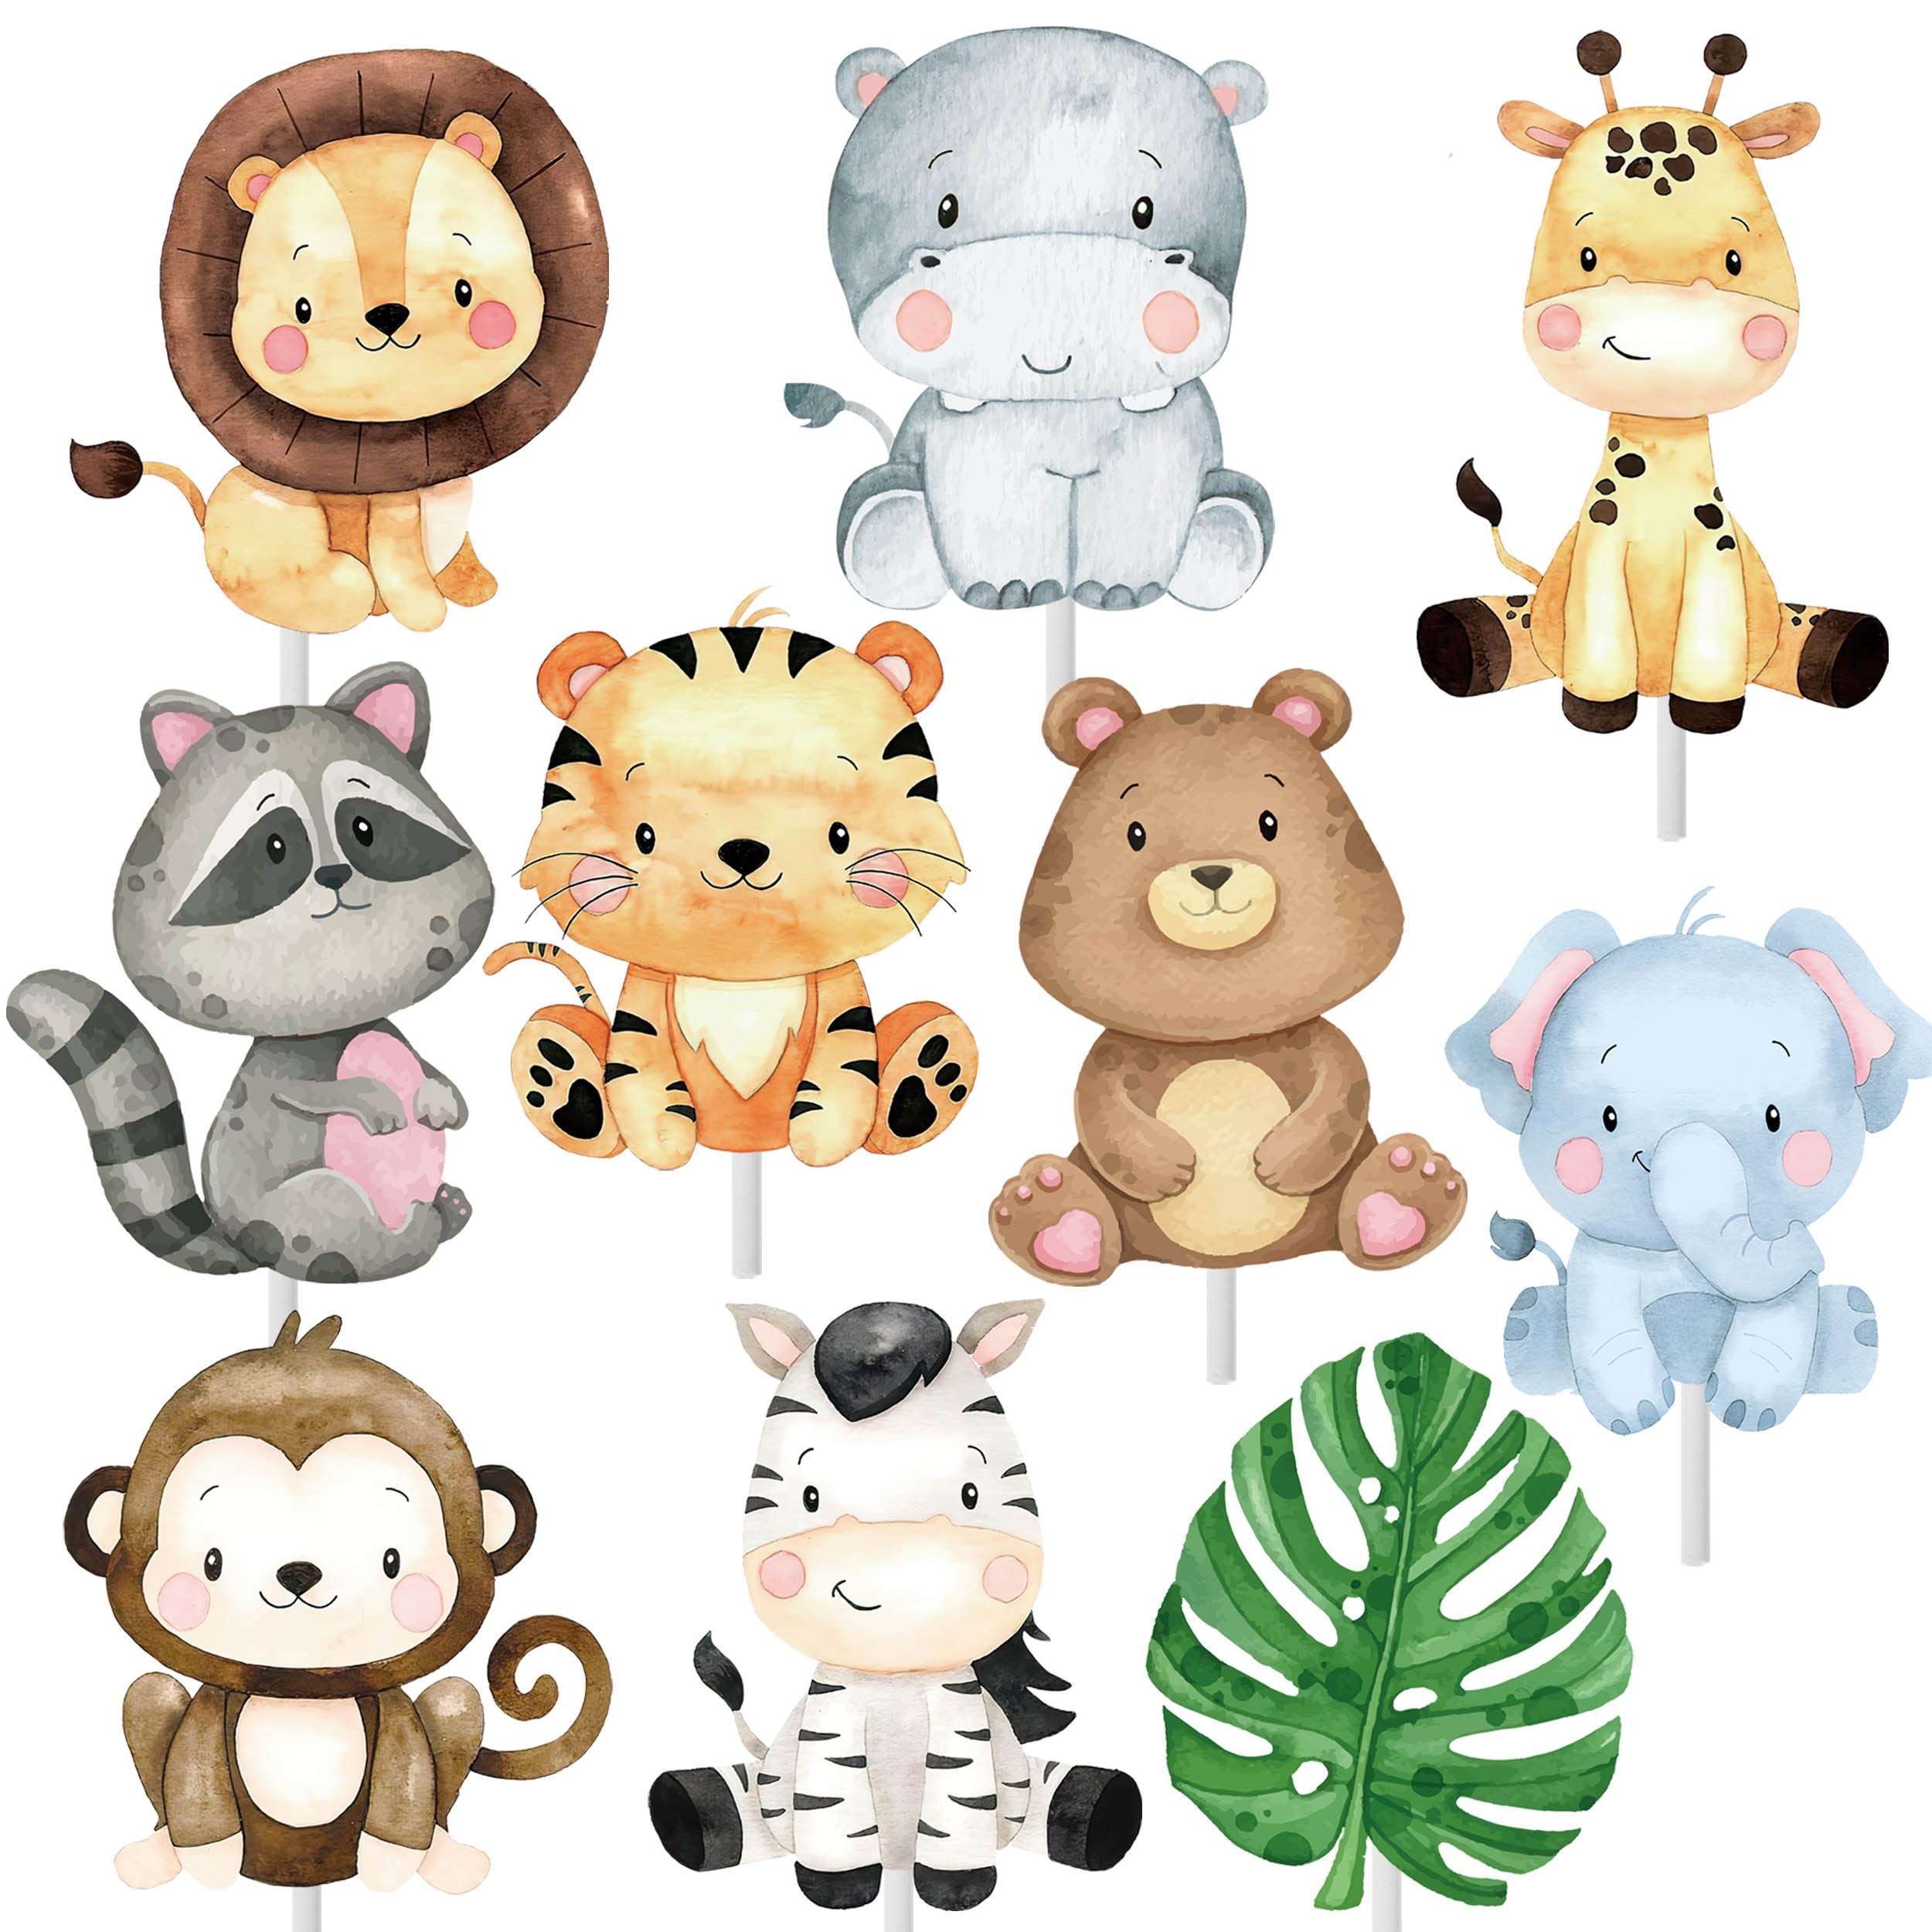 24pcs Jungle Animals Party Cupcake Toppers Decorations Jungle Safari Animal Theme Party Supplies for Zoo Wild Animal Birthday Party Baby Shower Supplies